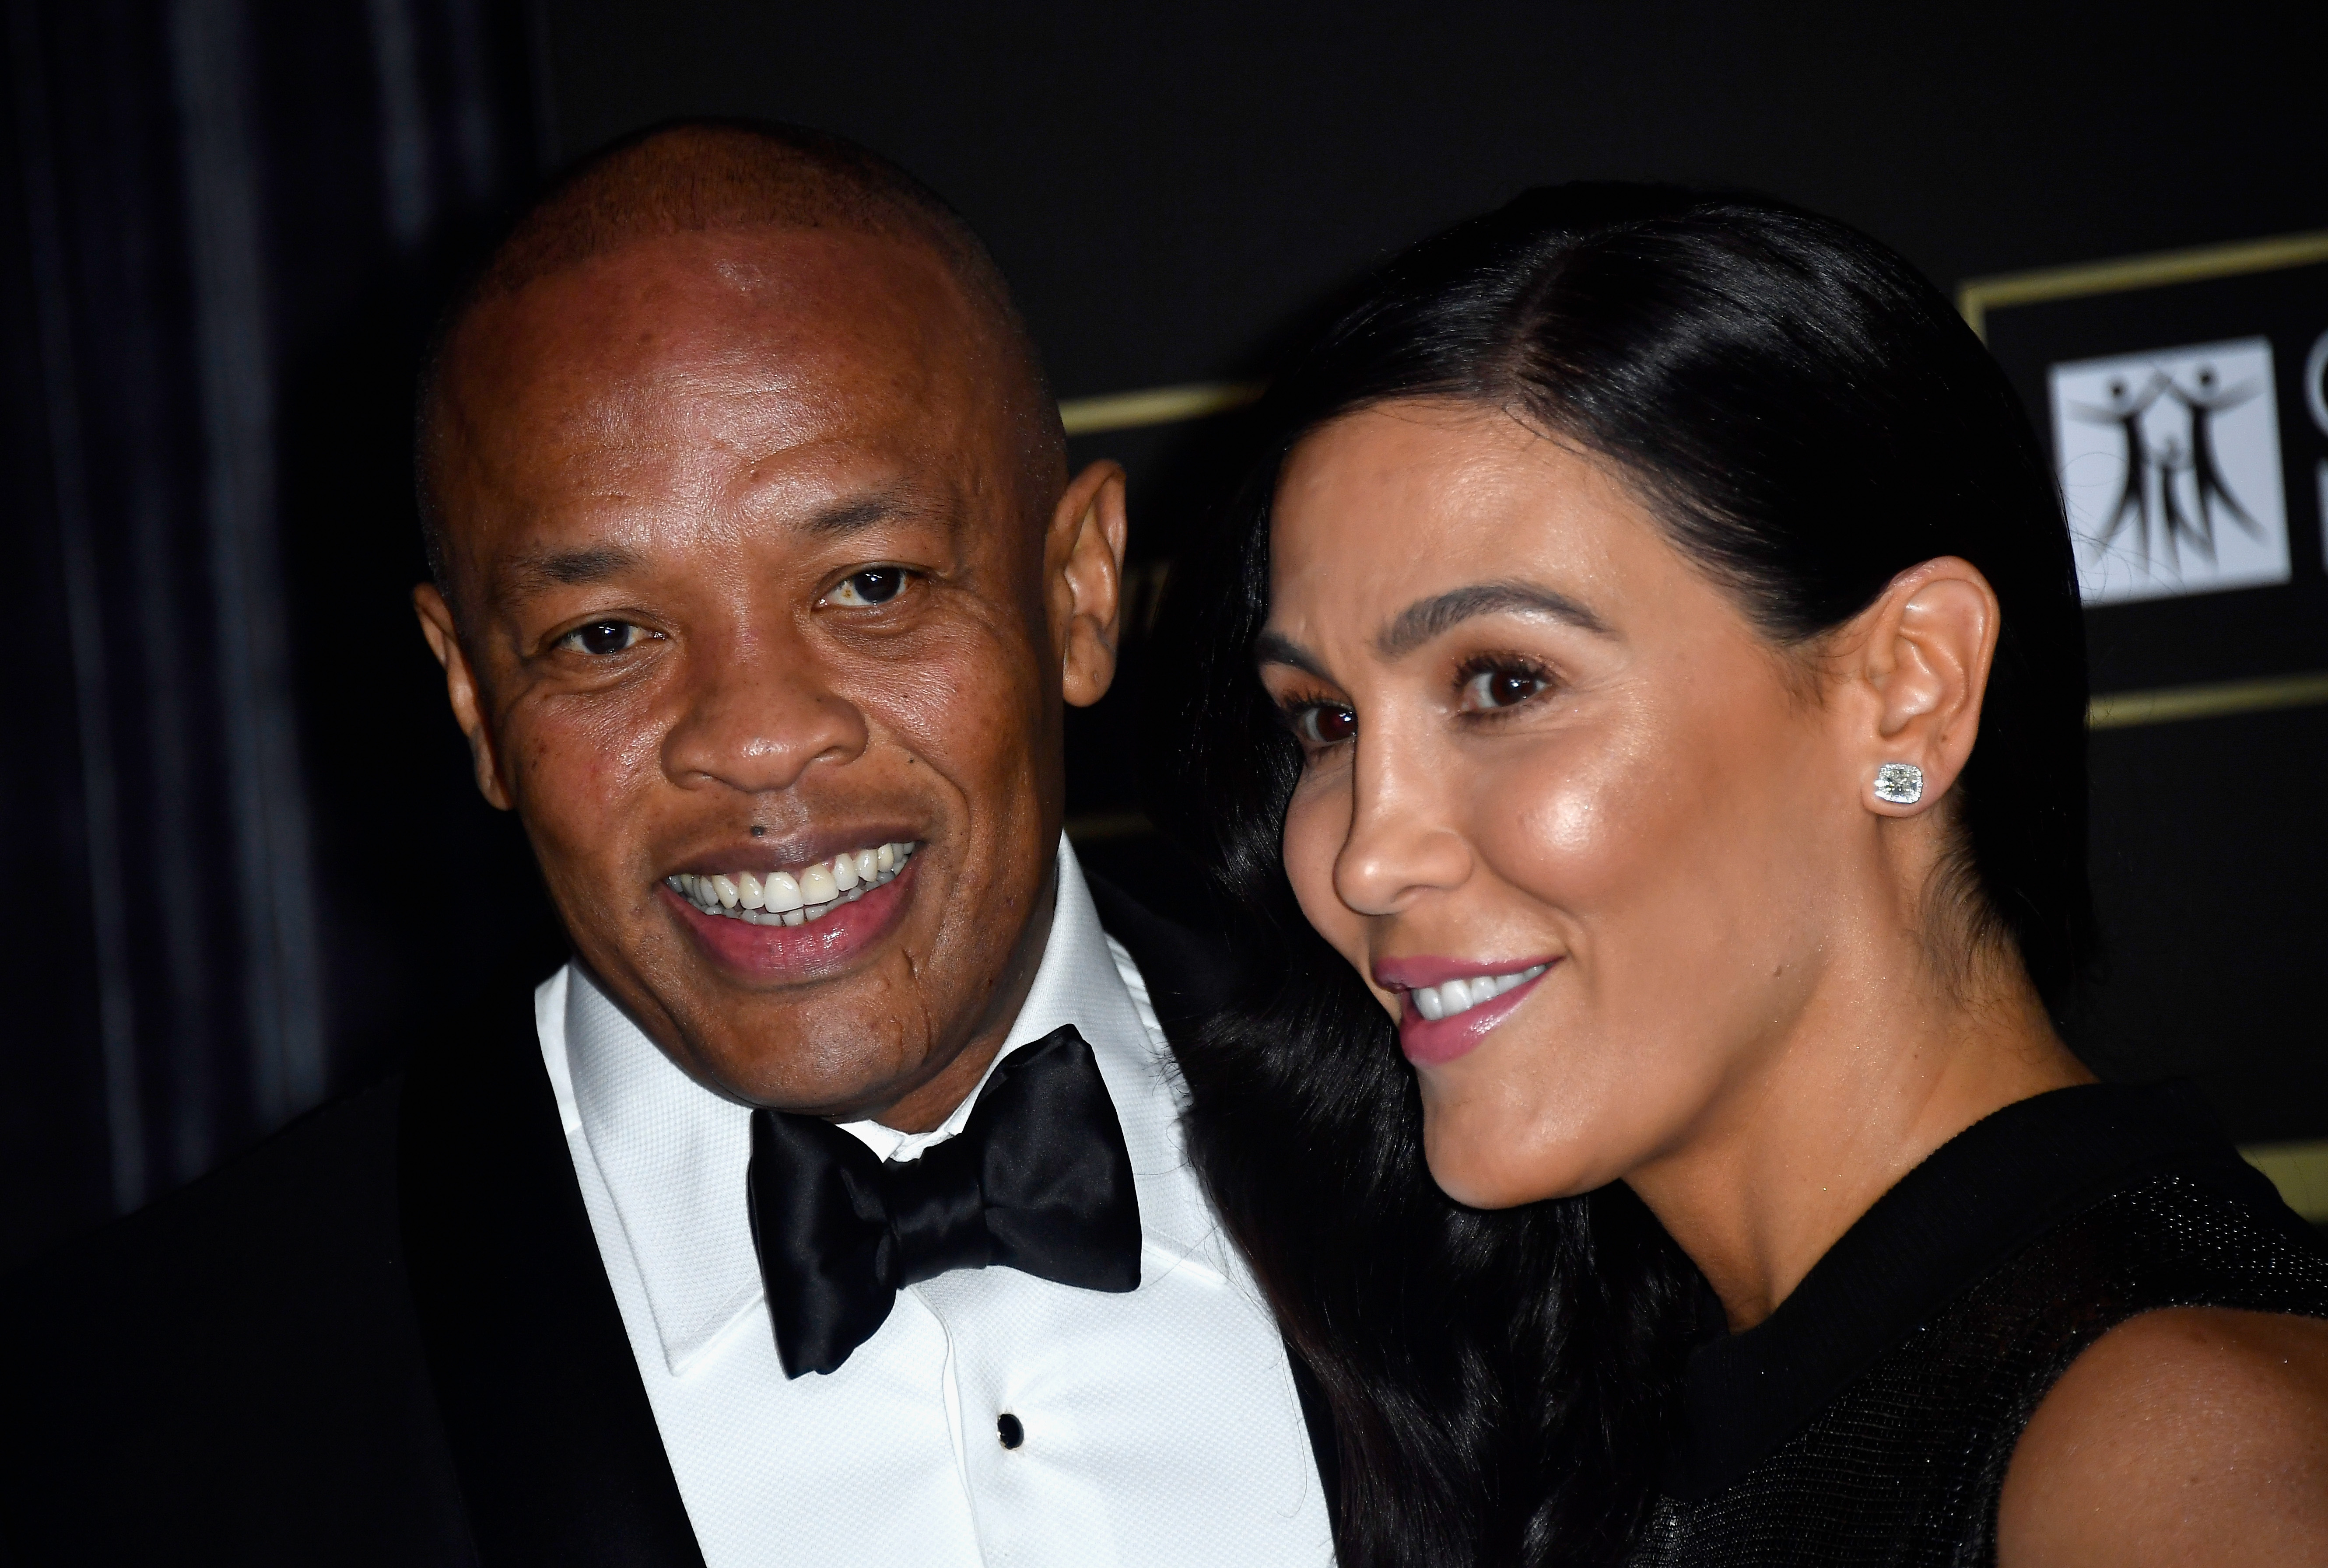 Dr. Dre and Nicole Young attend the City of Hope Spirit of Life Gala 2018 on October 11, 2018 in Santa Monica, California | Source: Getty Images